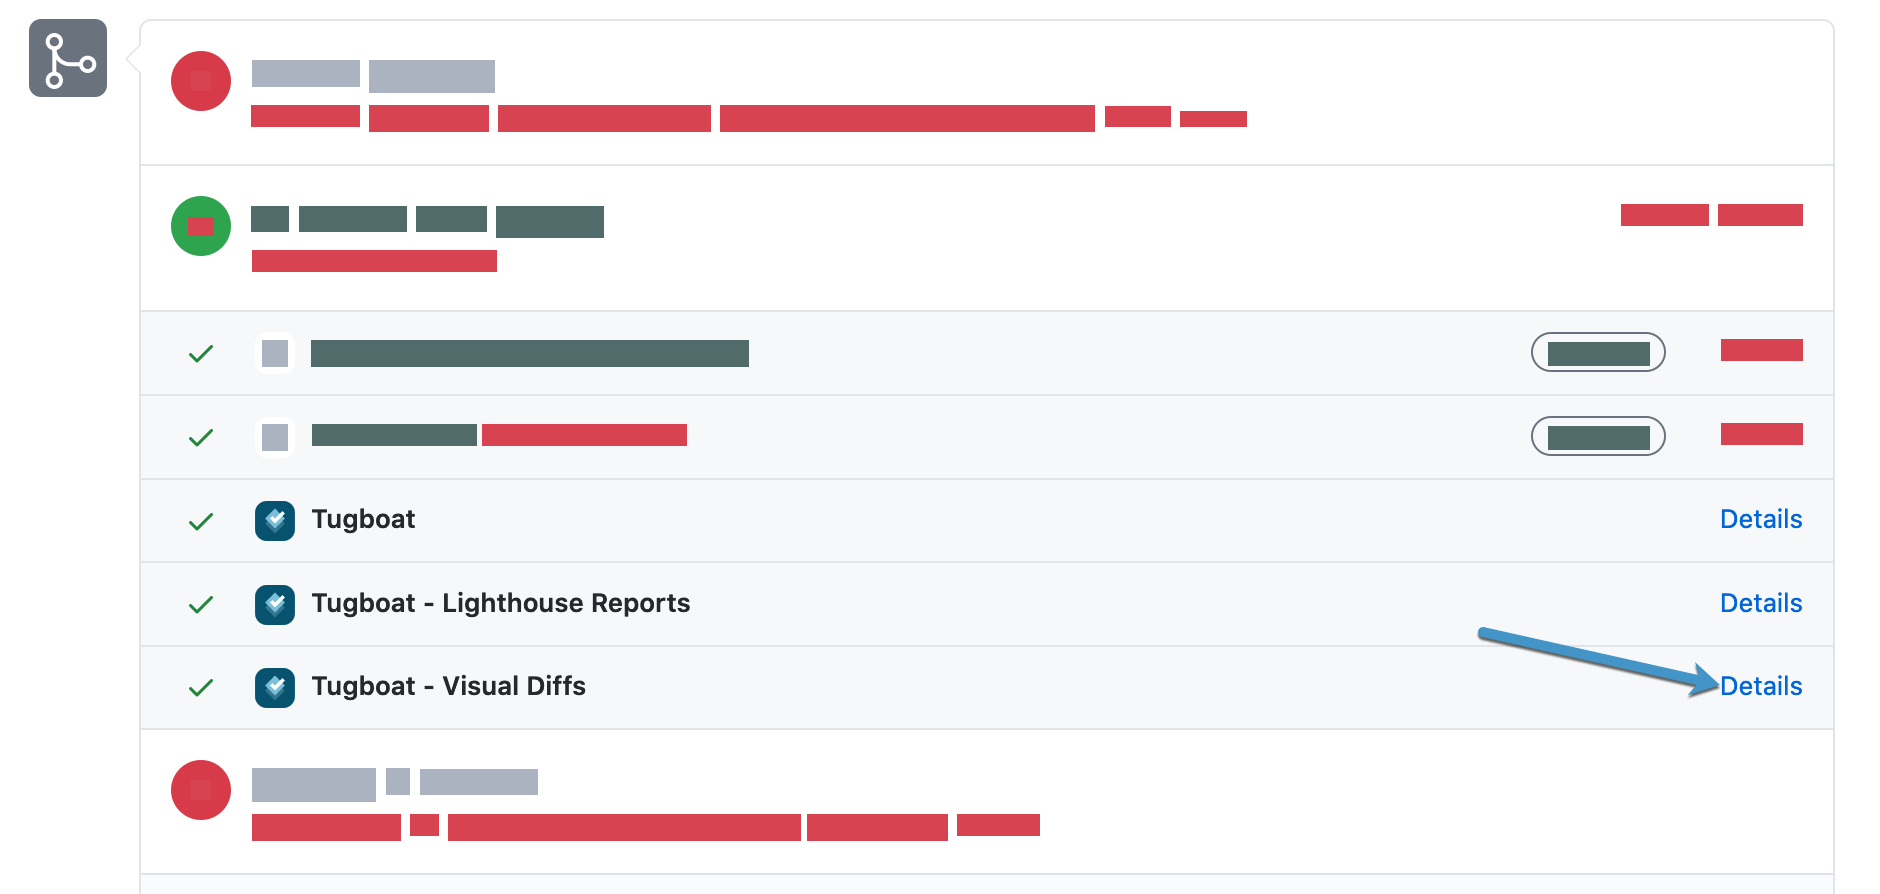 Screenshot of GitHub status showing a red X on Tugboat - Visual Diffs